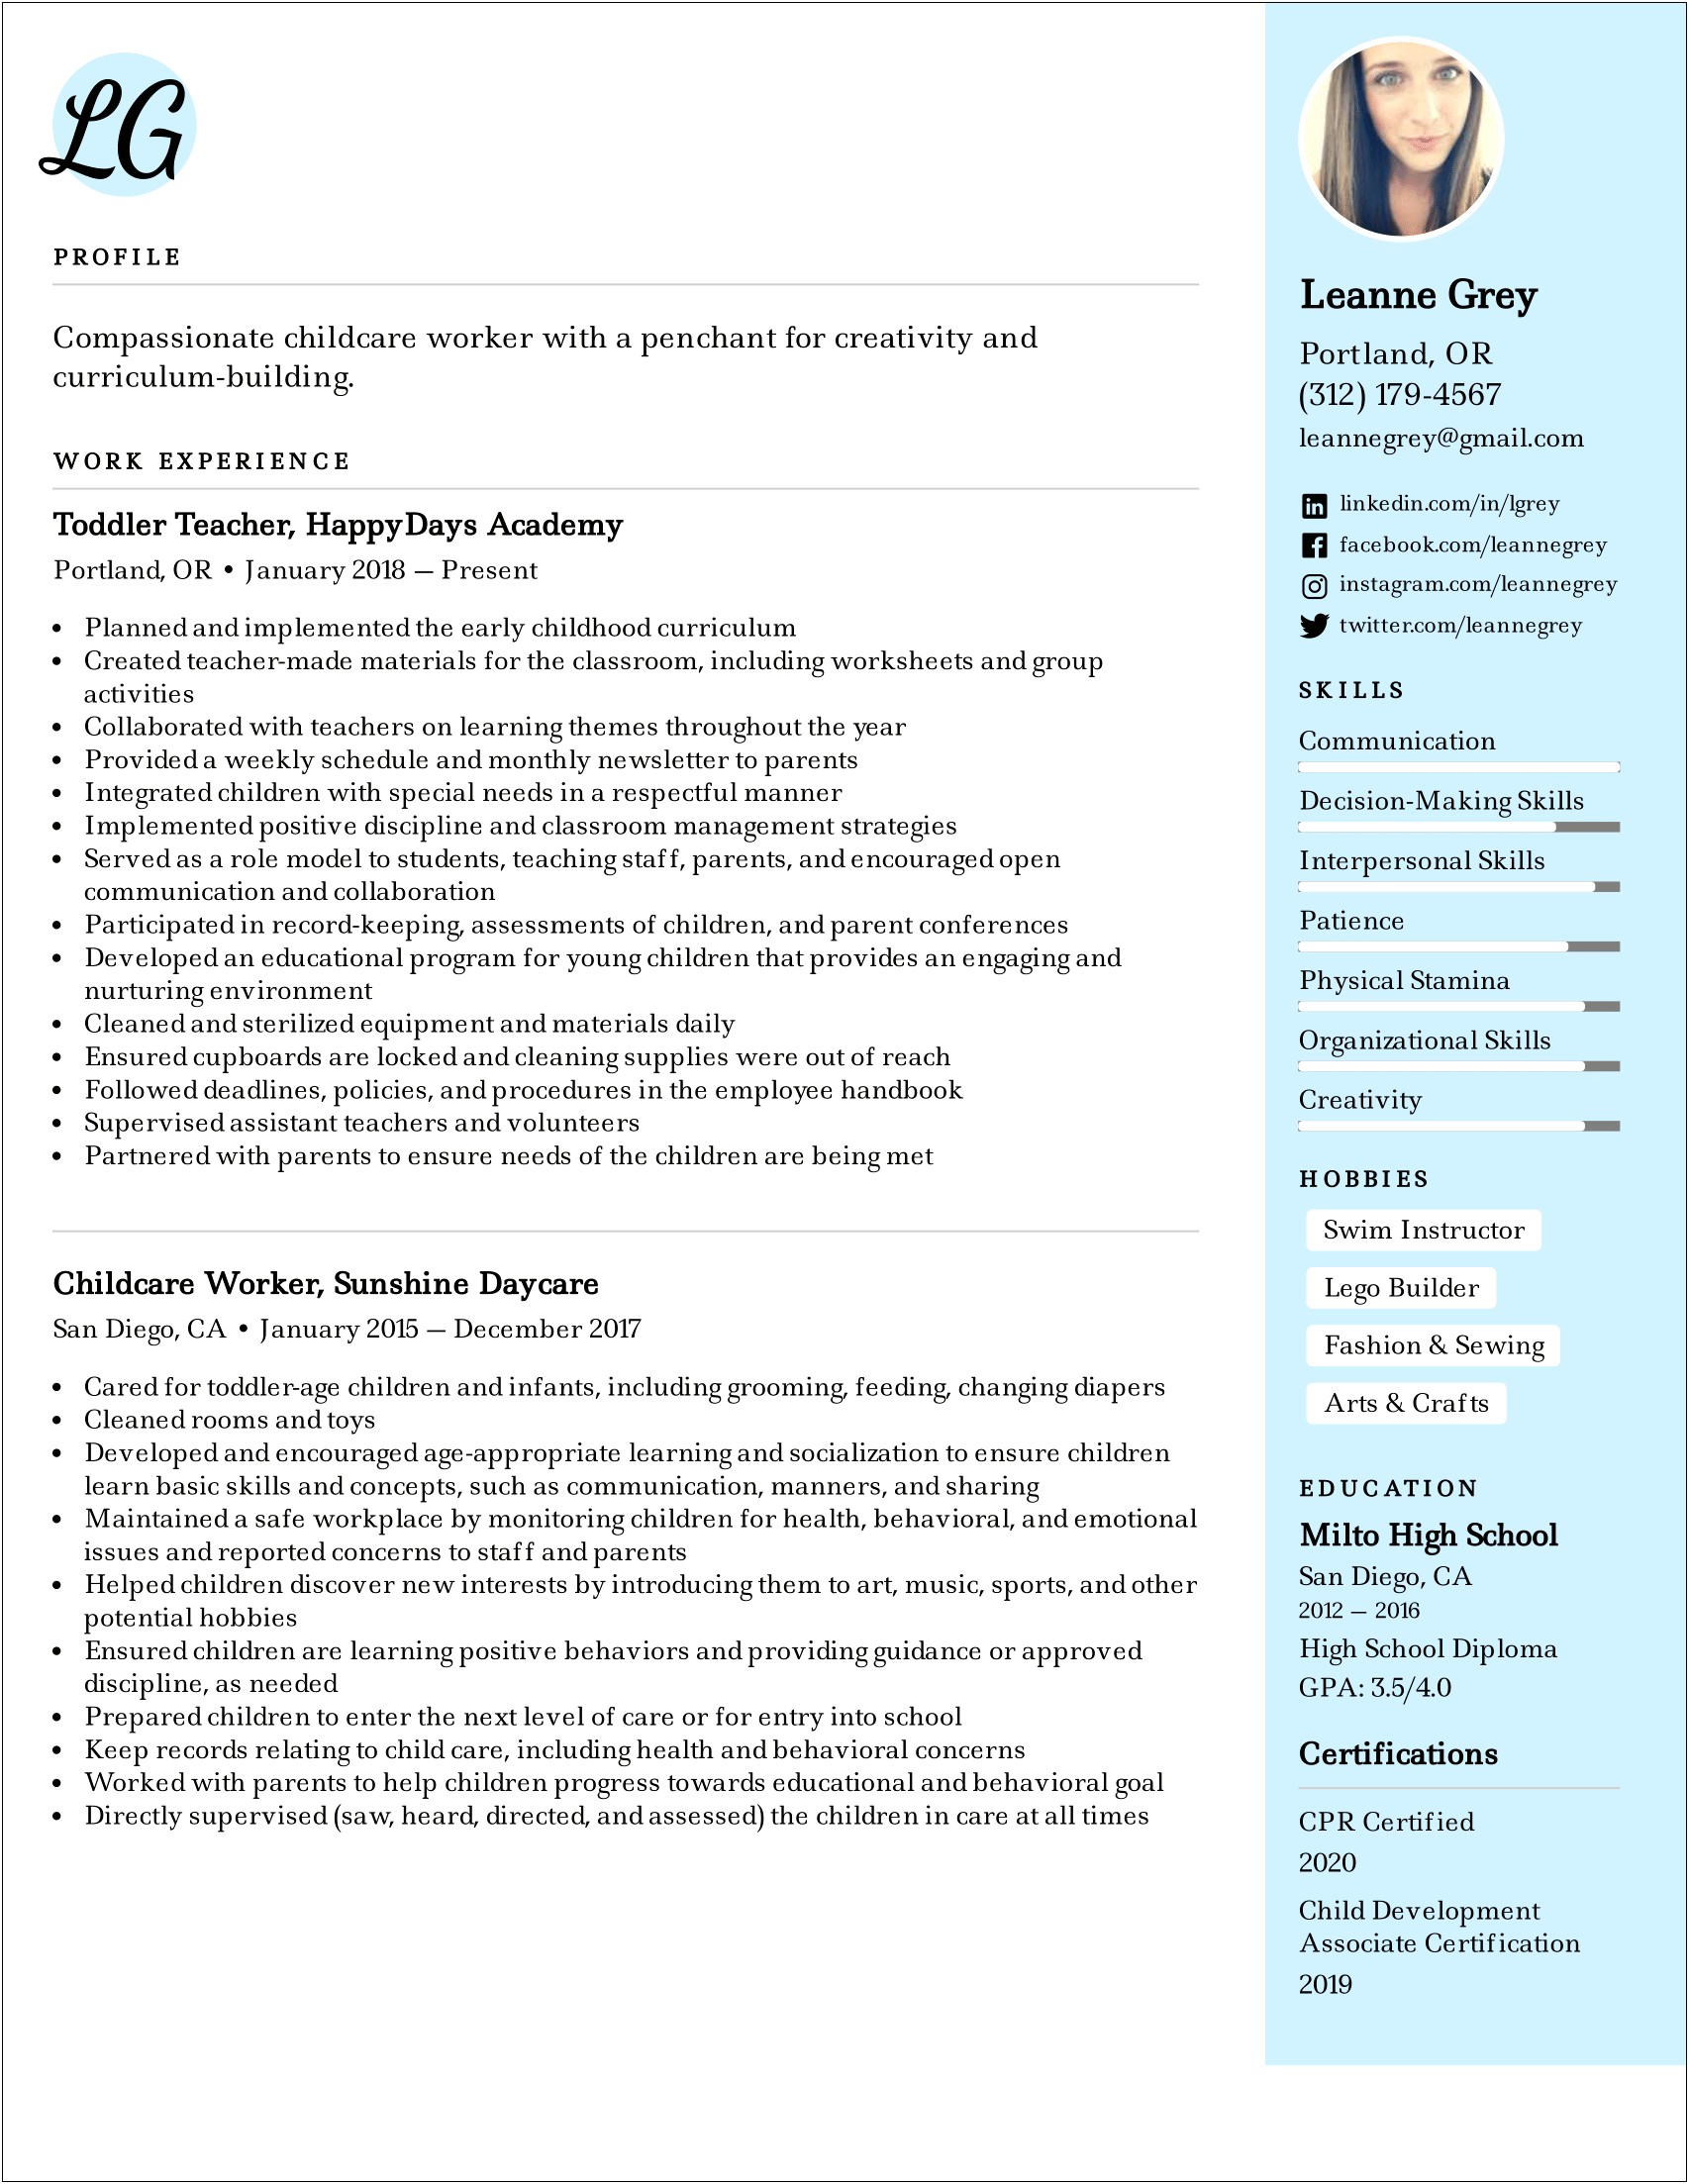 Resume Skills For Childcare Assistant